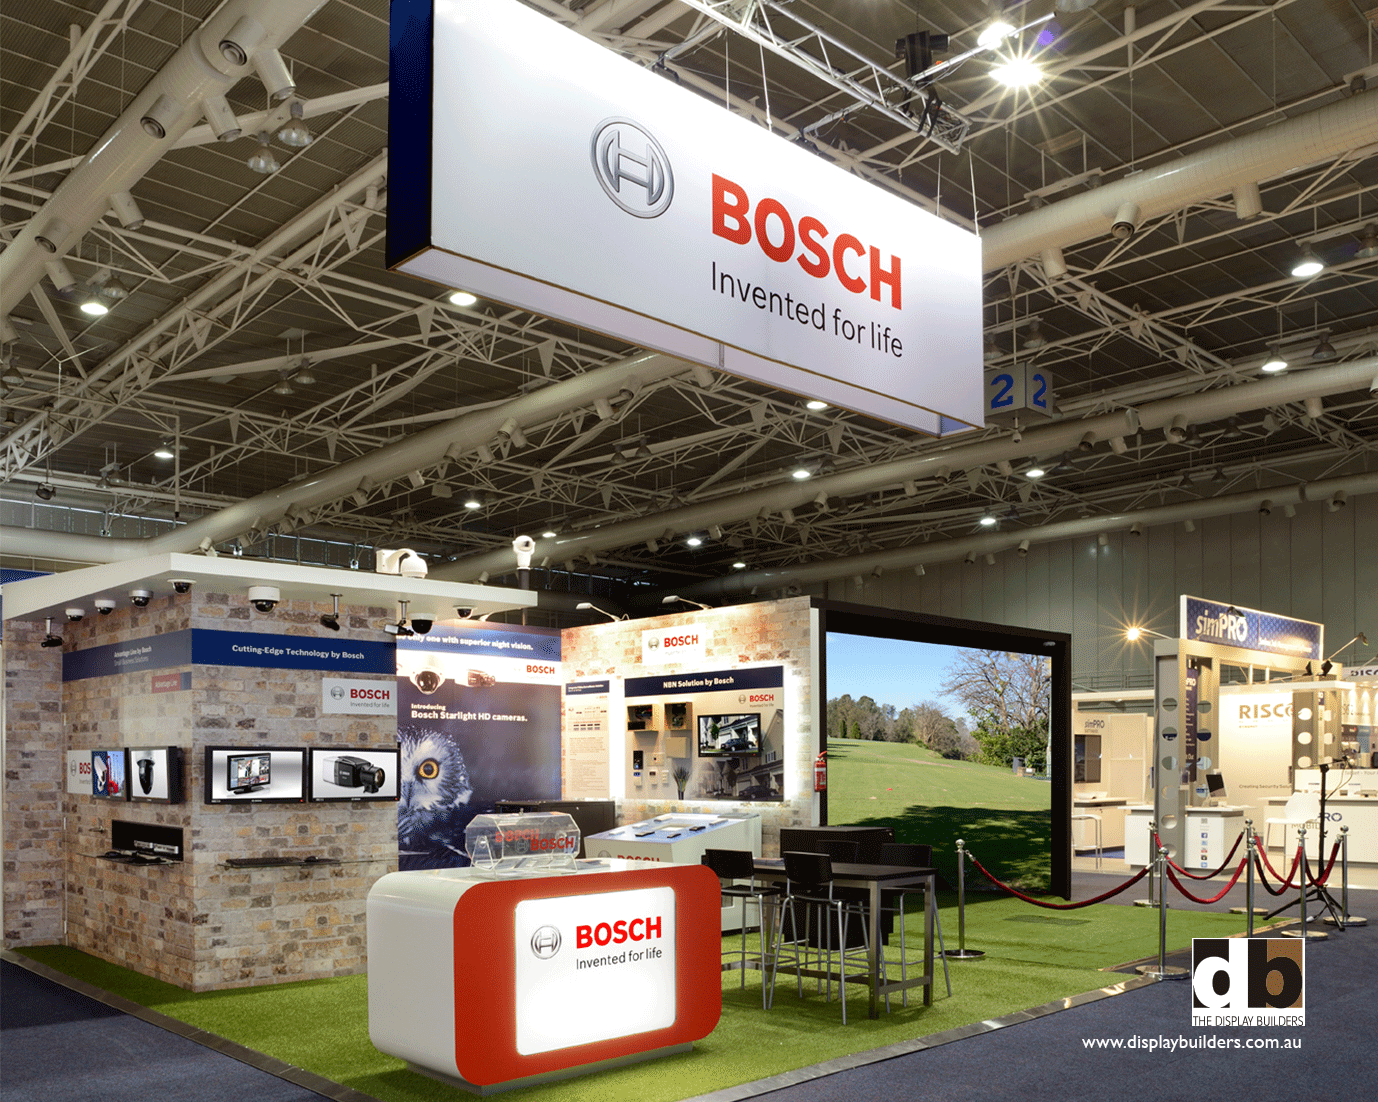 the bosch stand security 2013featured an interactive golf game to small